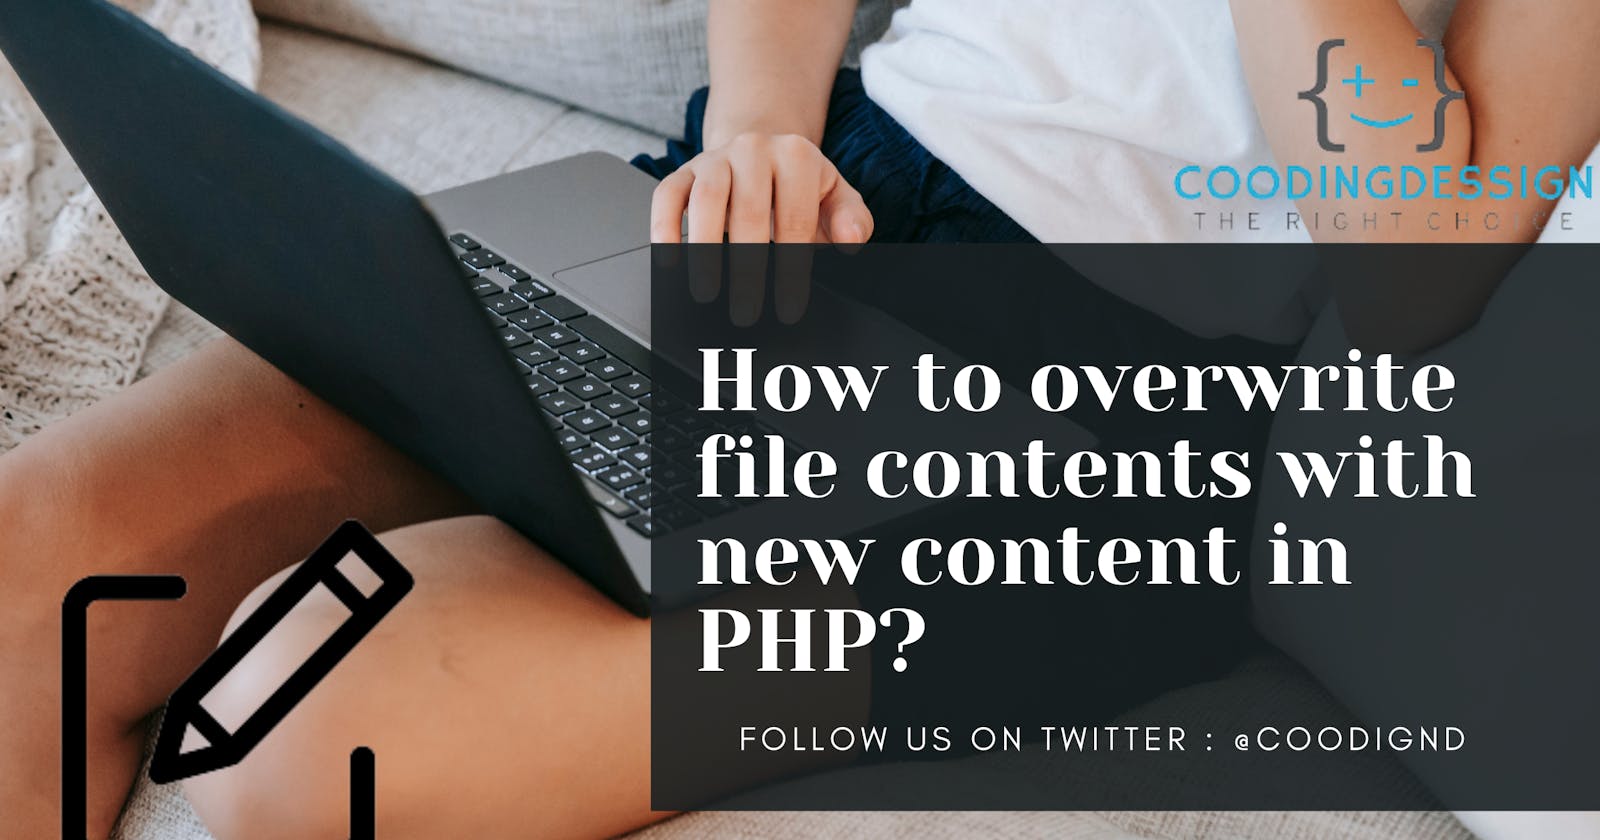 How to re-write file contents in PHP?